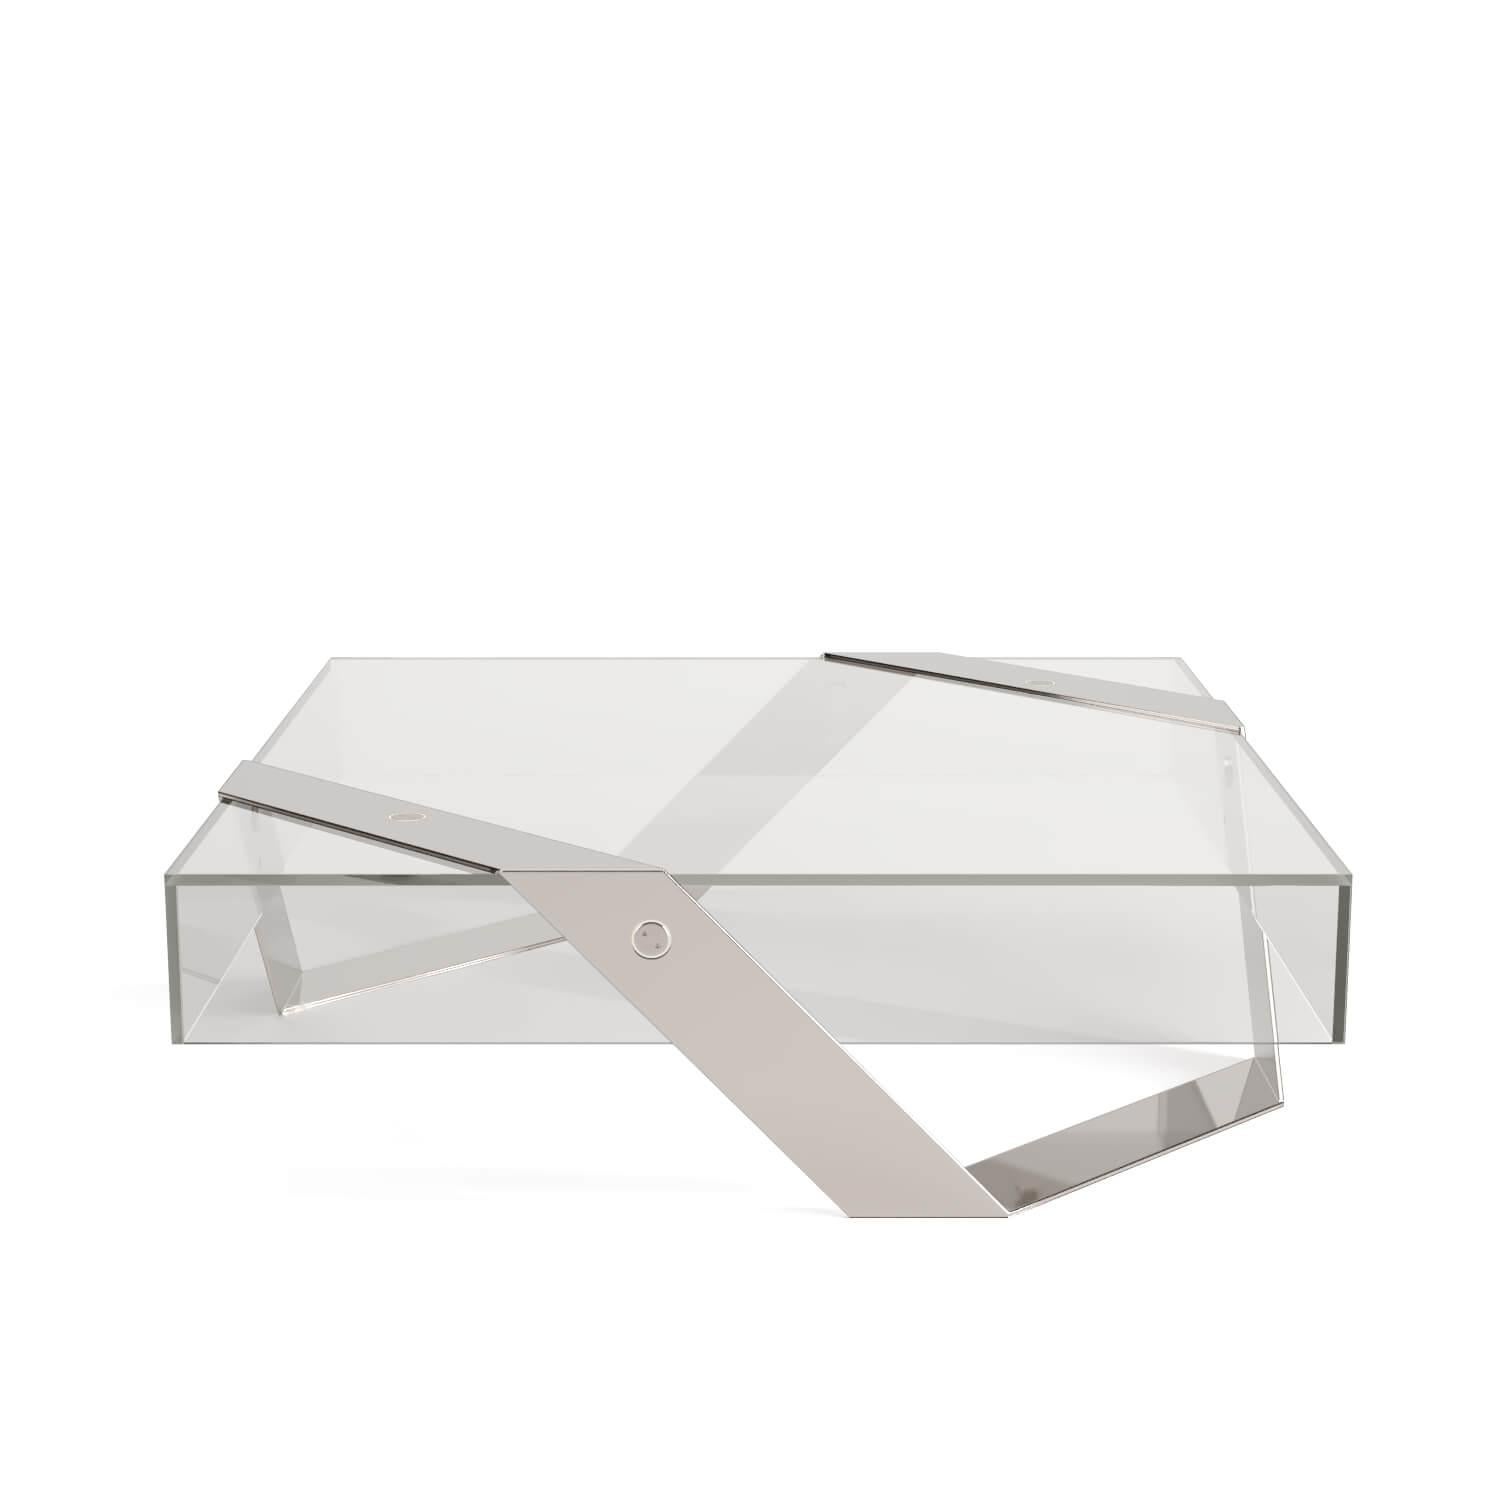 Modern Minimalist Square Coffee Table White Lacquer Brushed Stainless Steel For Sale 2